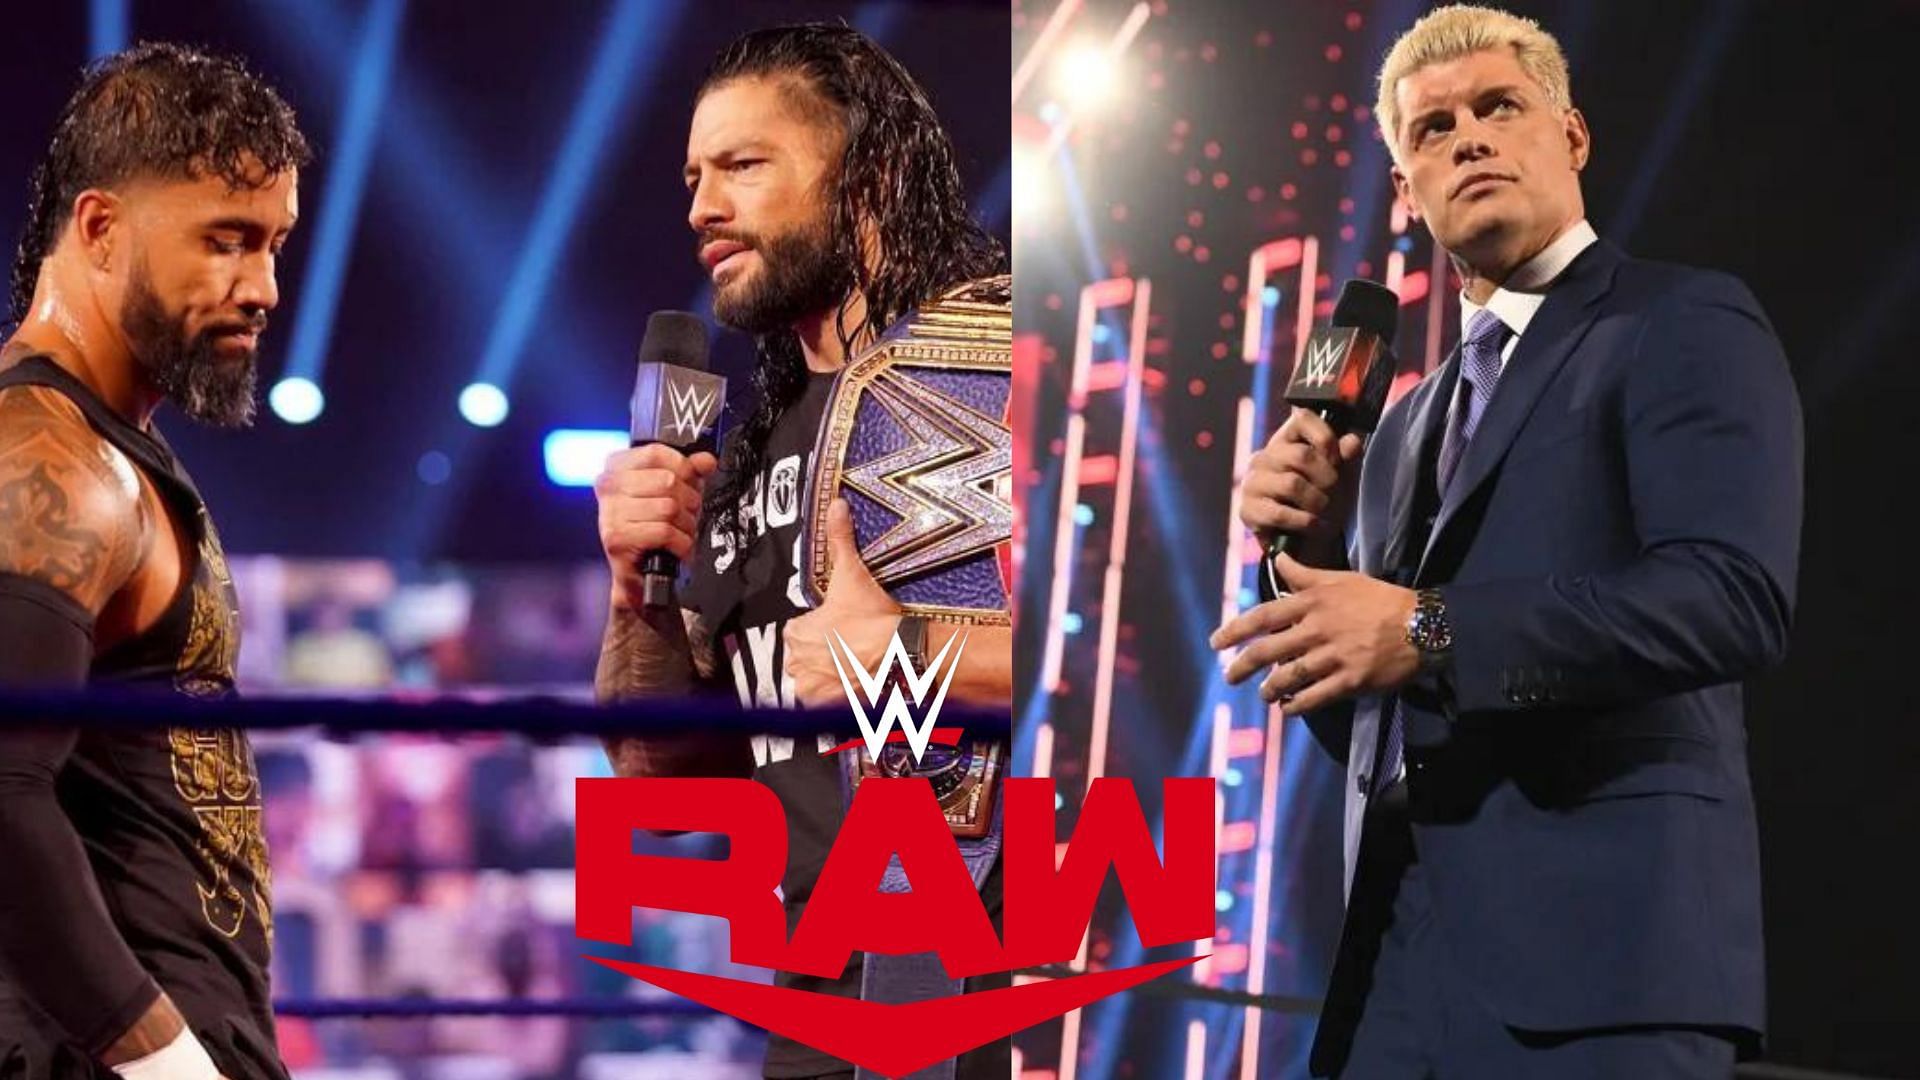 Details for the March 20, 2023 episode of WWE RAW